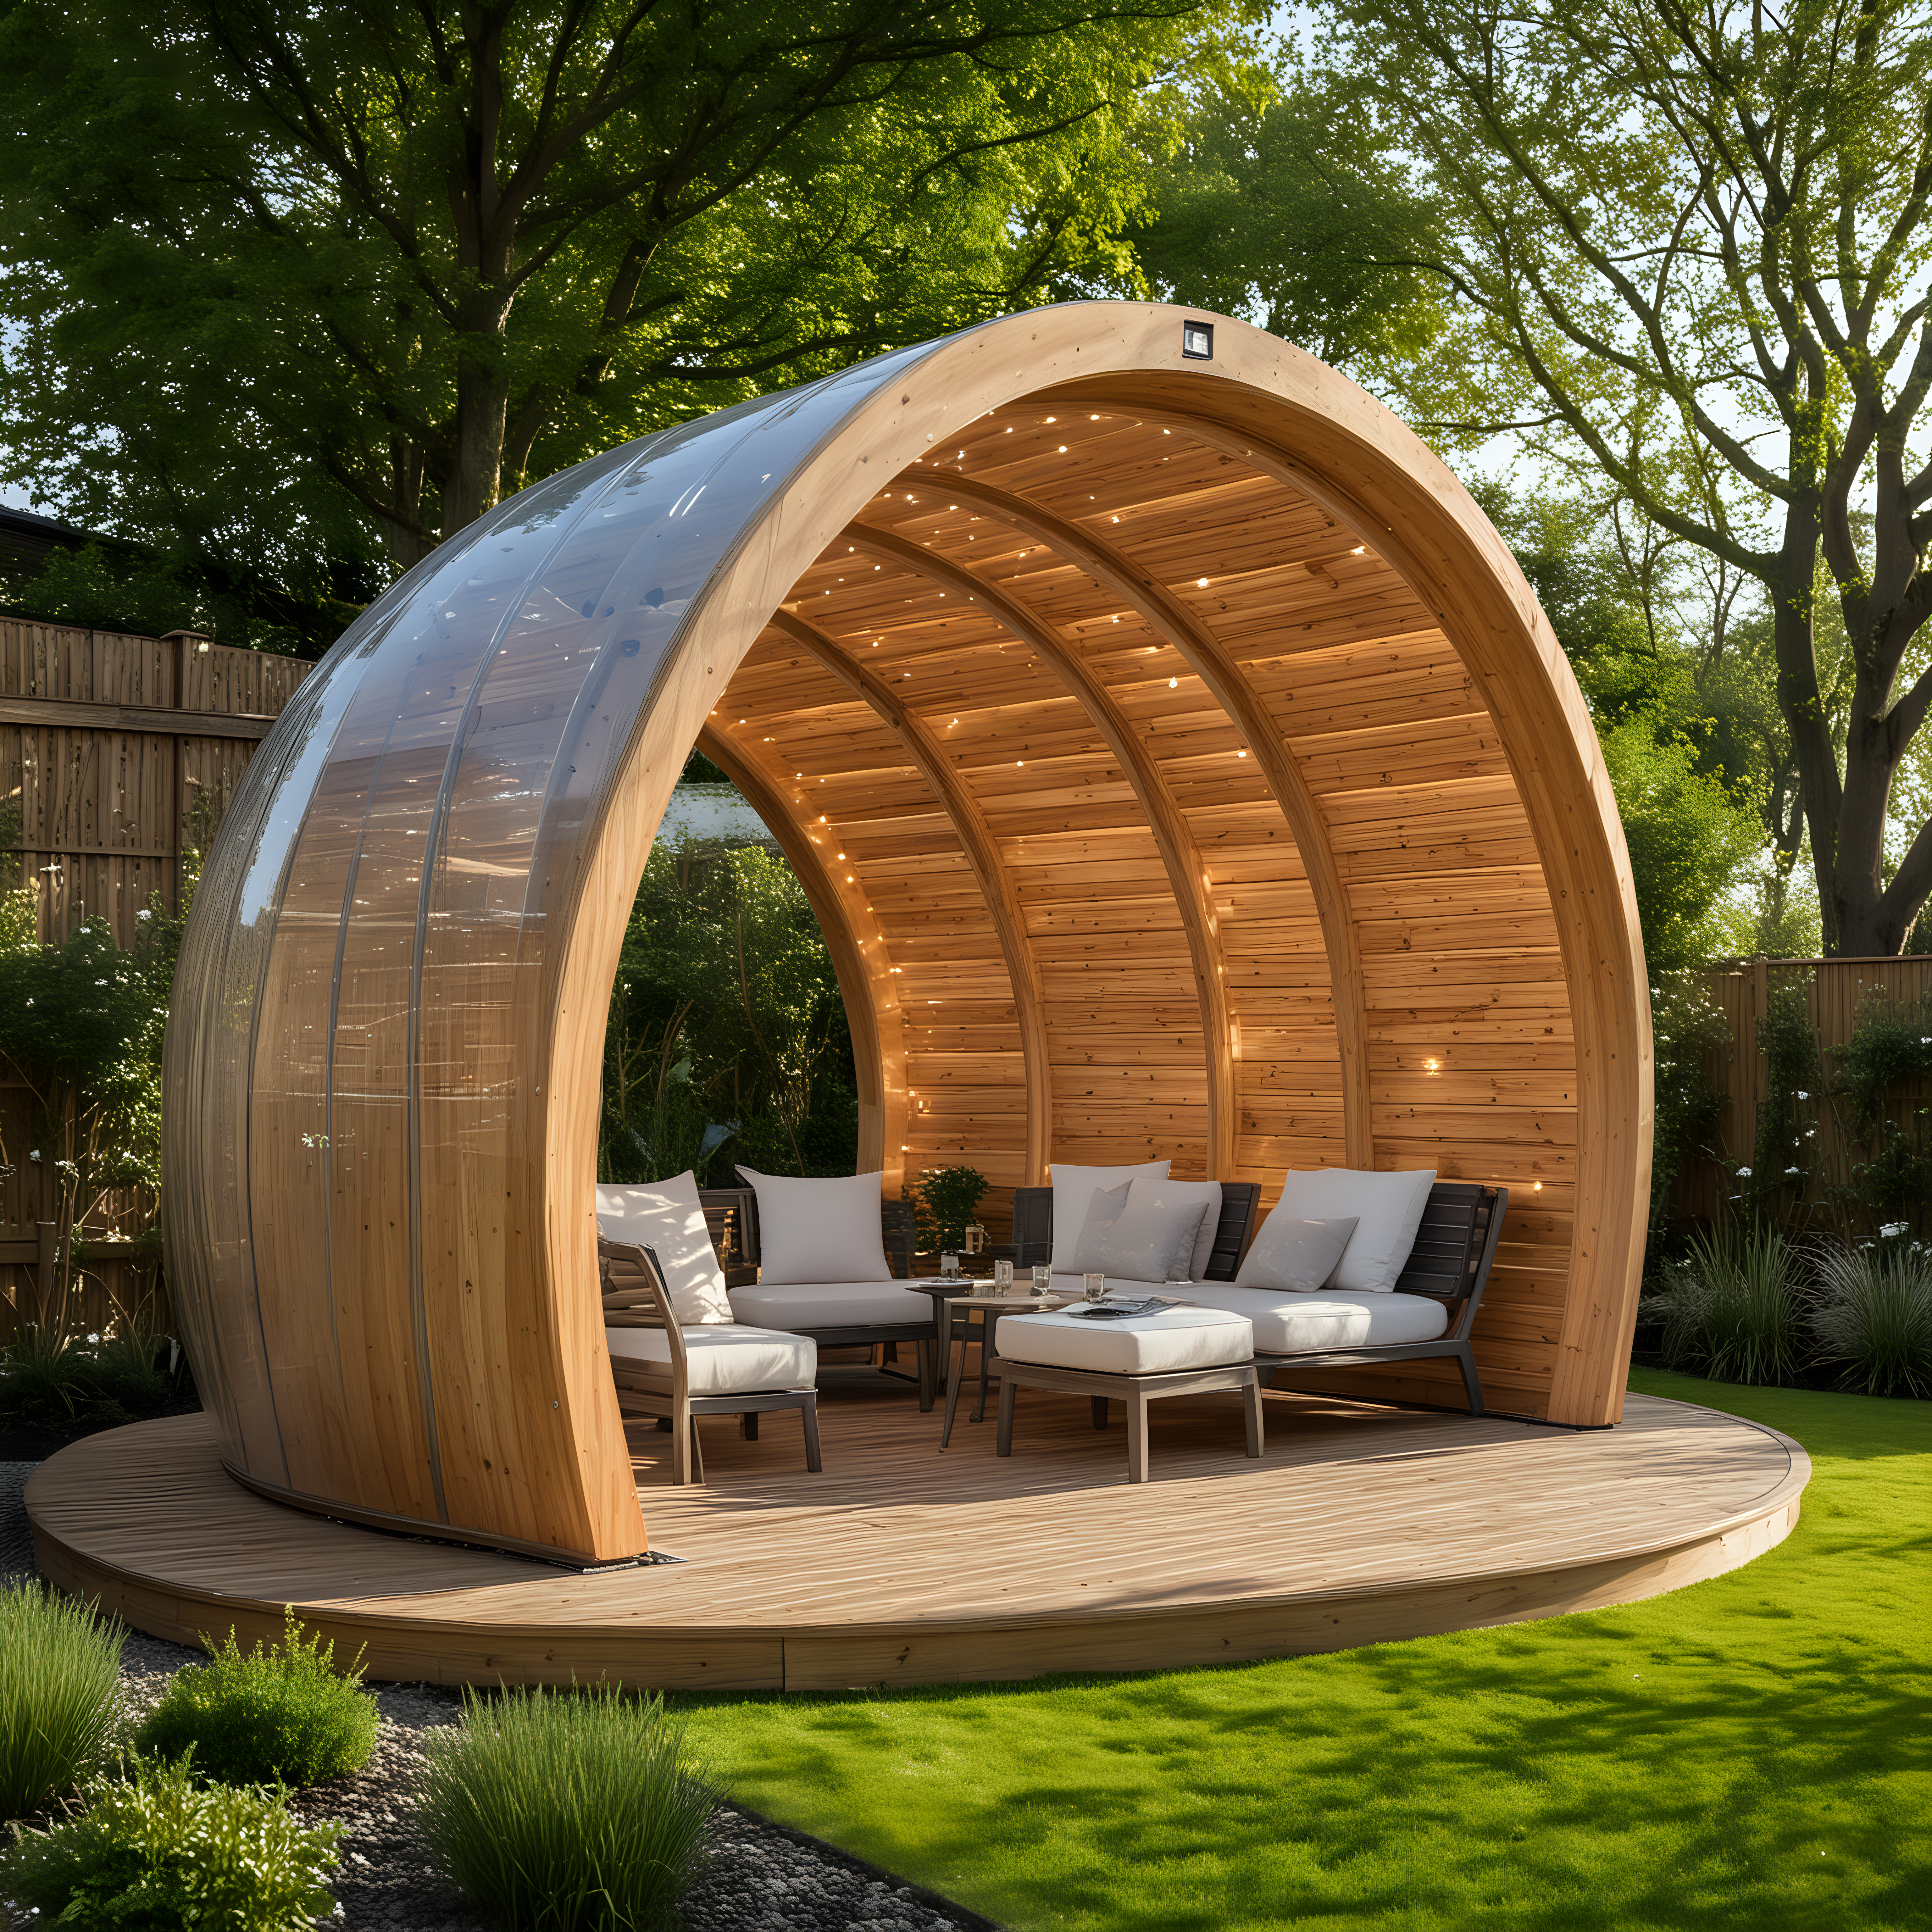 Relaxation Pod with Glulam Arches and Ambient Lighting in a Serene Garden